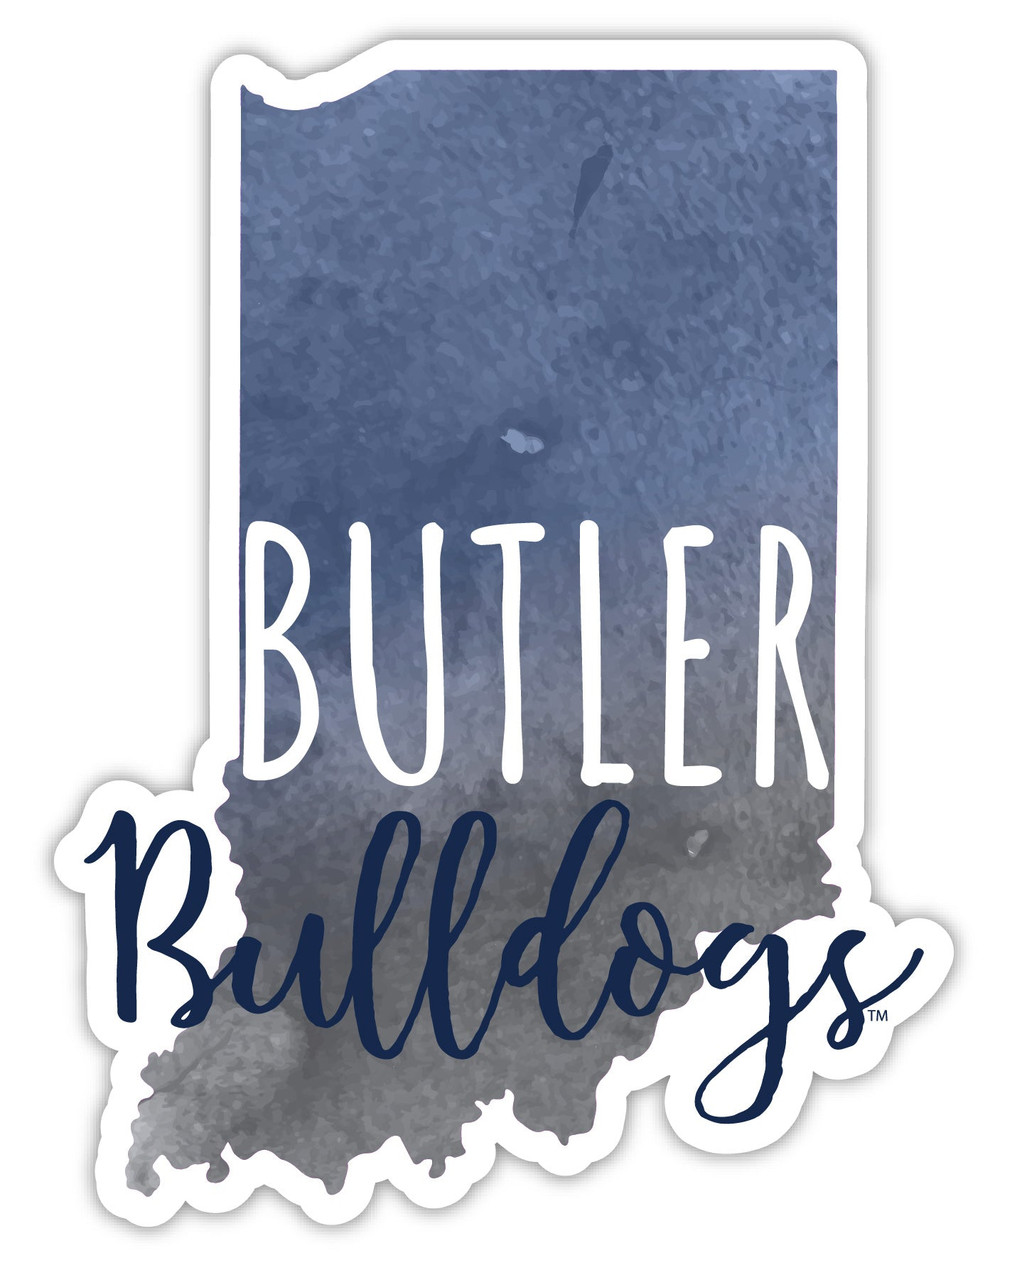 Butler Bulldogs Watercolor State Die Cut Decal 4-Inch